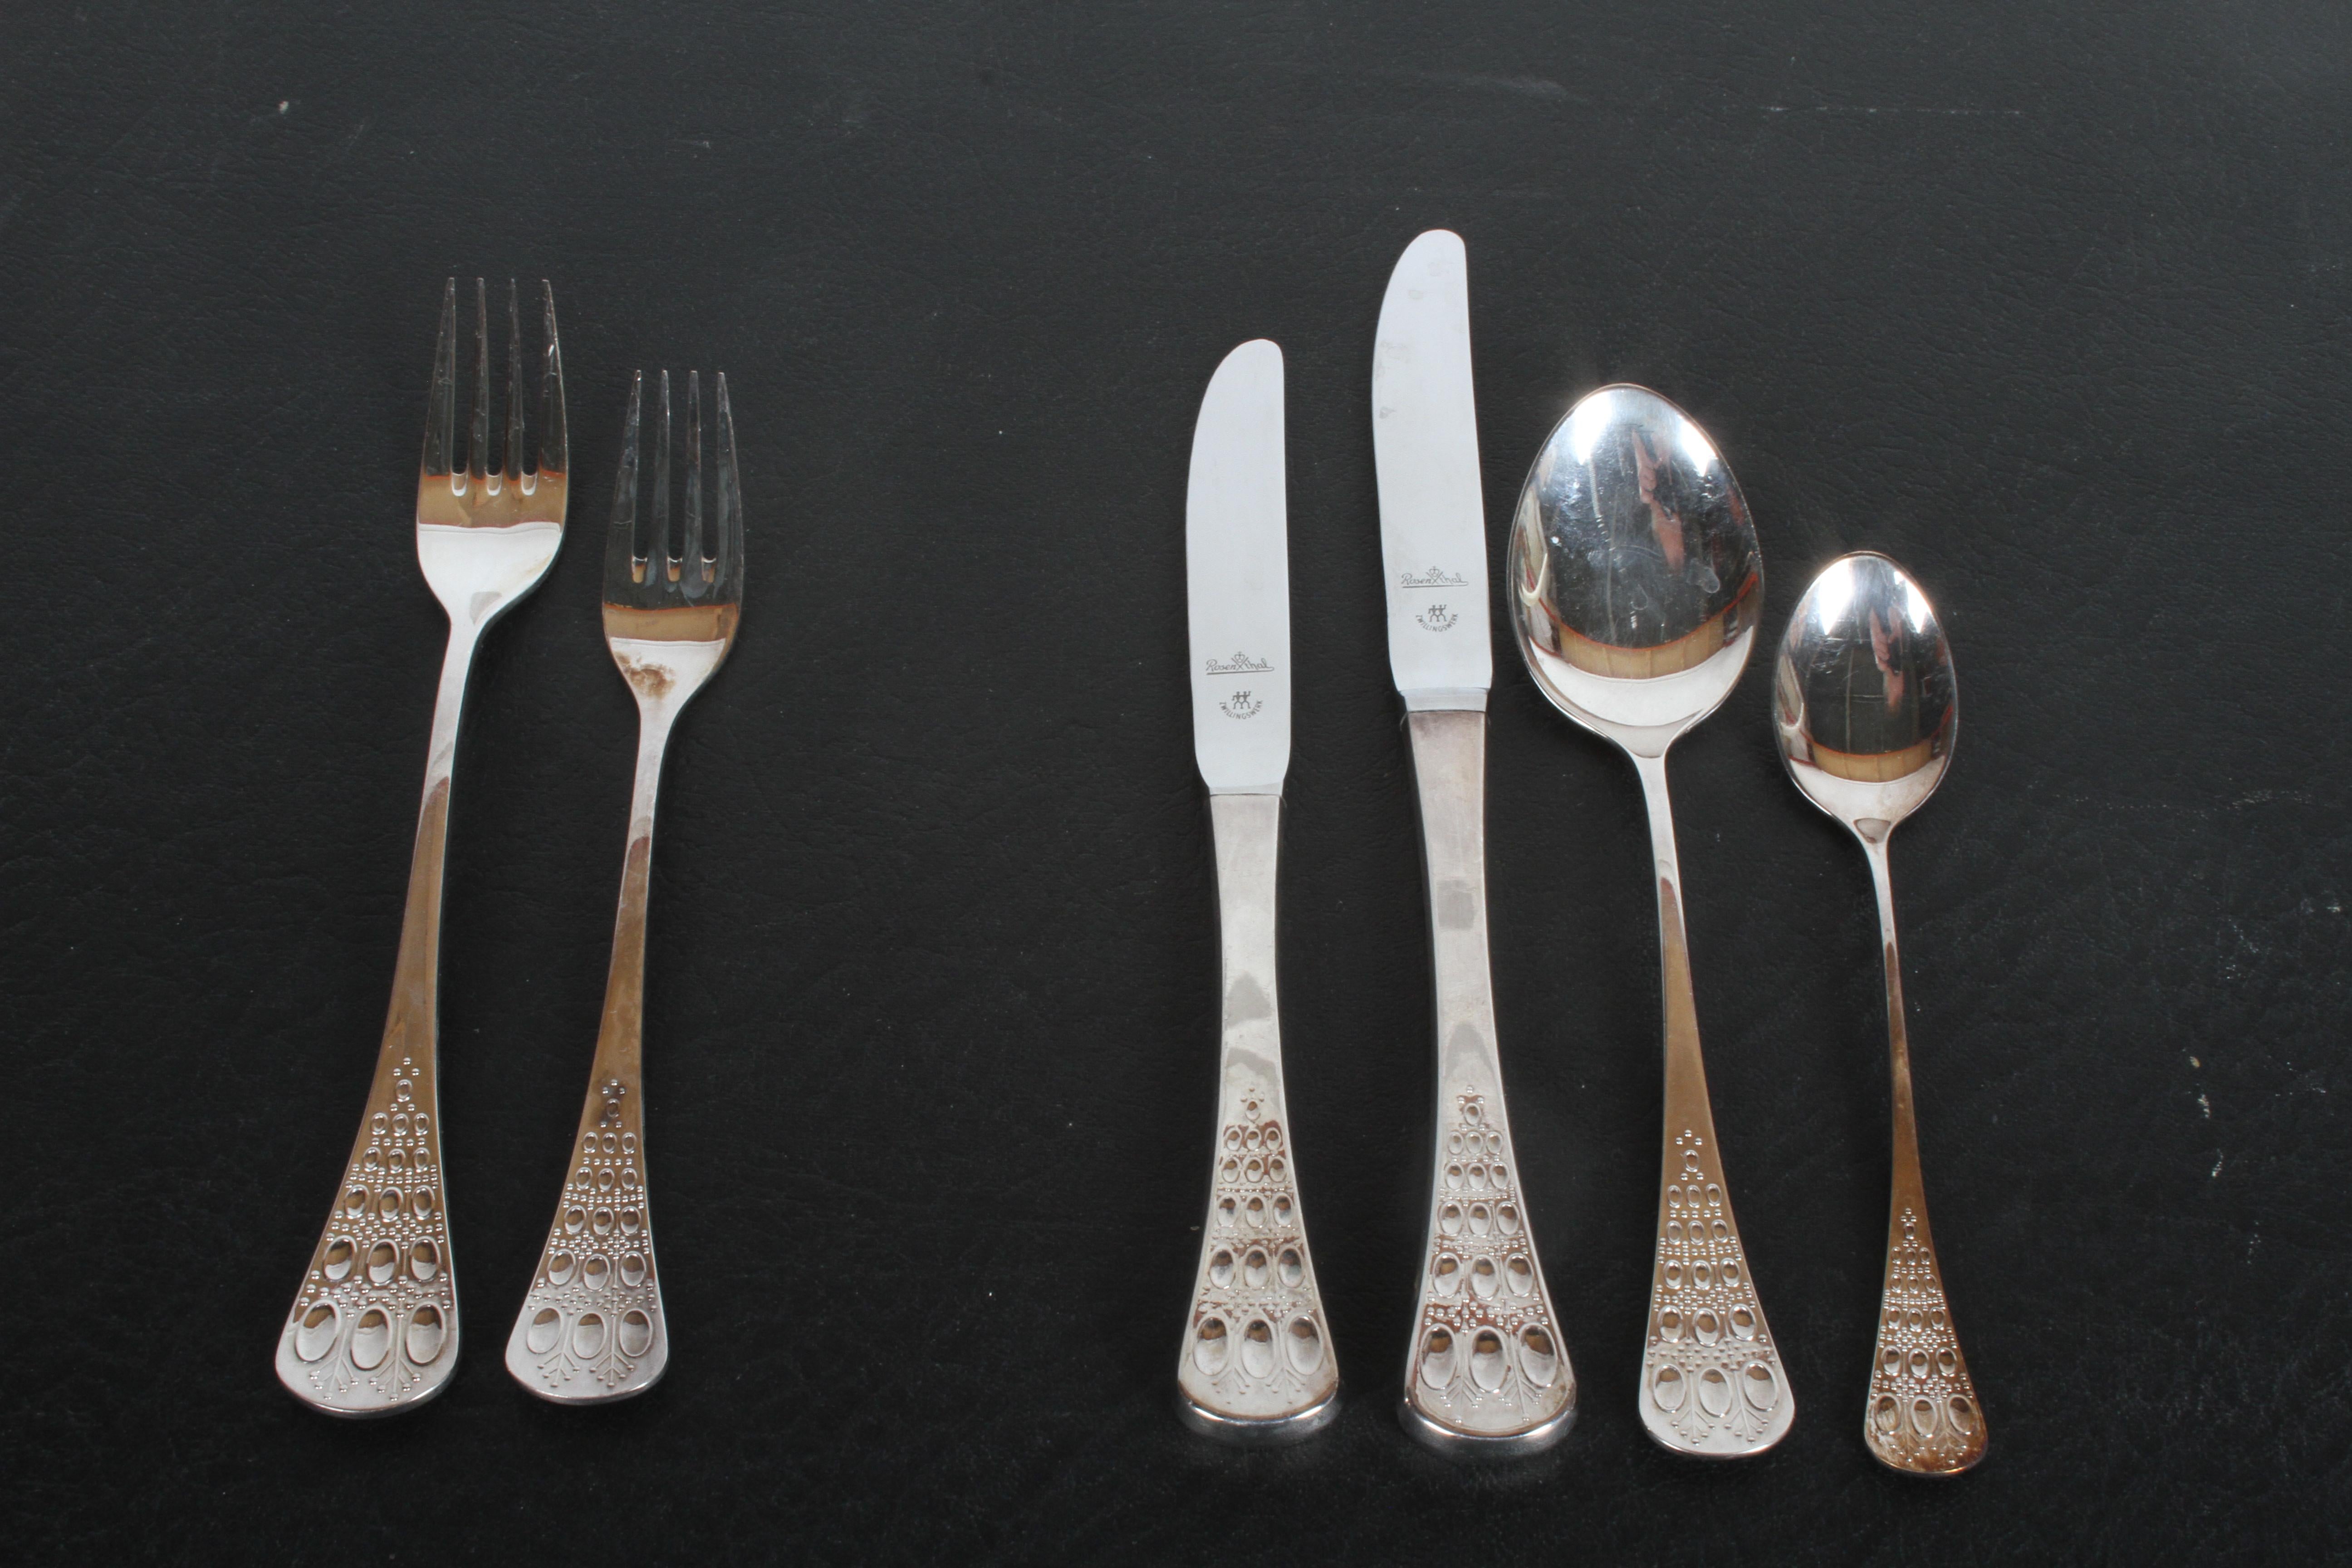 Romance by Bijorn Windblad for Rosenthal Studio-Linie Mid-Century Modern silver plate flatware for 12 with service pieces in original modernist Rosenthal Studio-Line case. The case has room to expand your set. Minor tarnish to some pieces. No longer